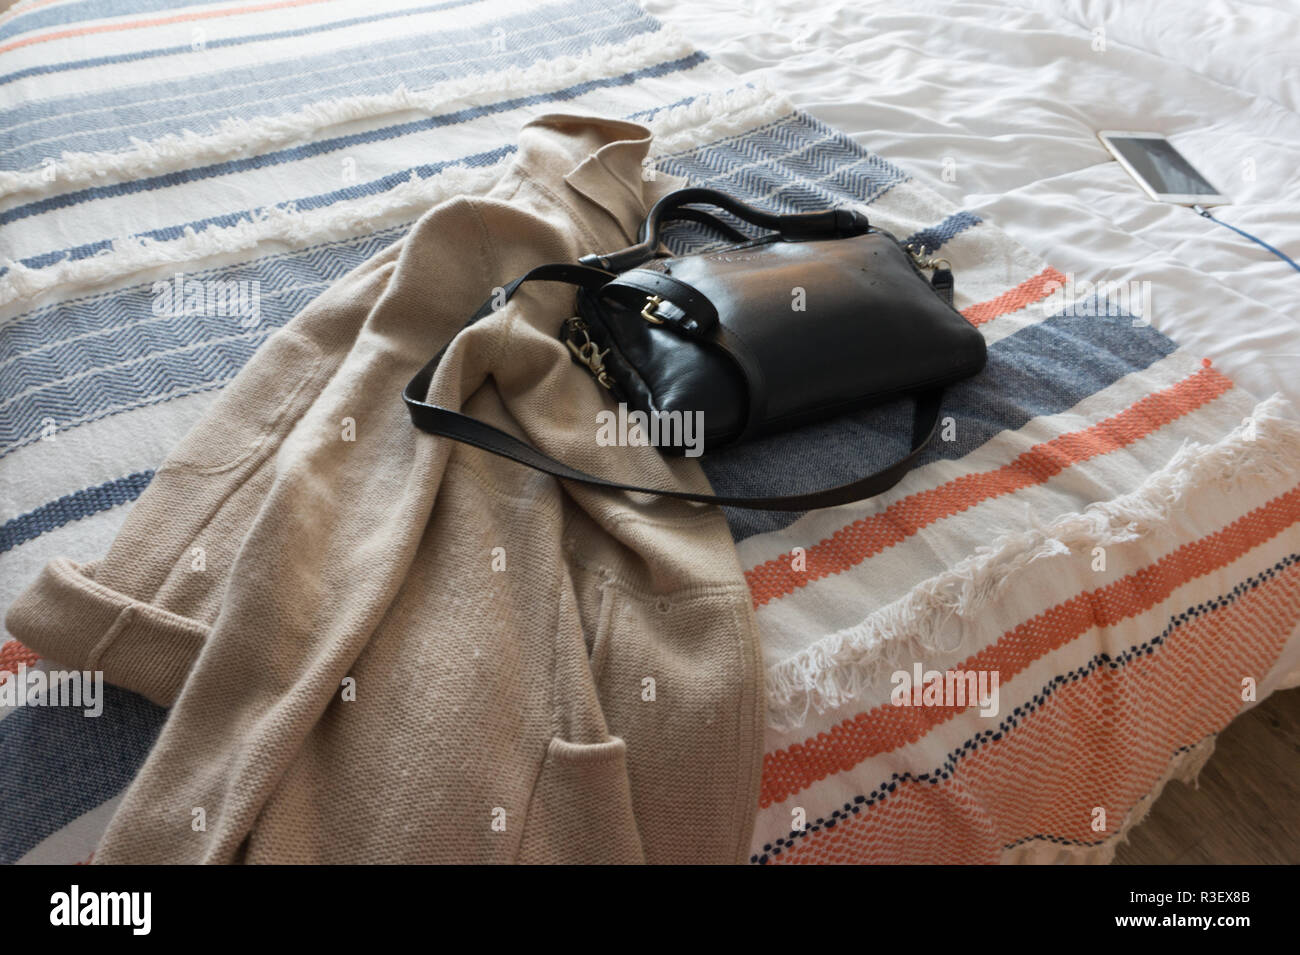 Bag left on bed in hotel room Stock Photo